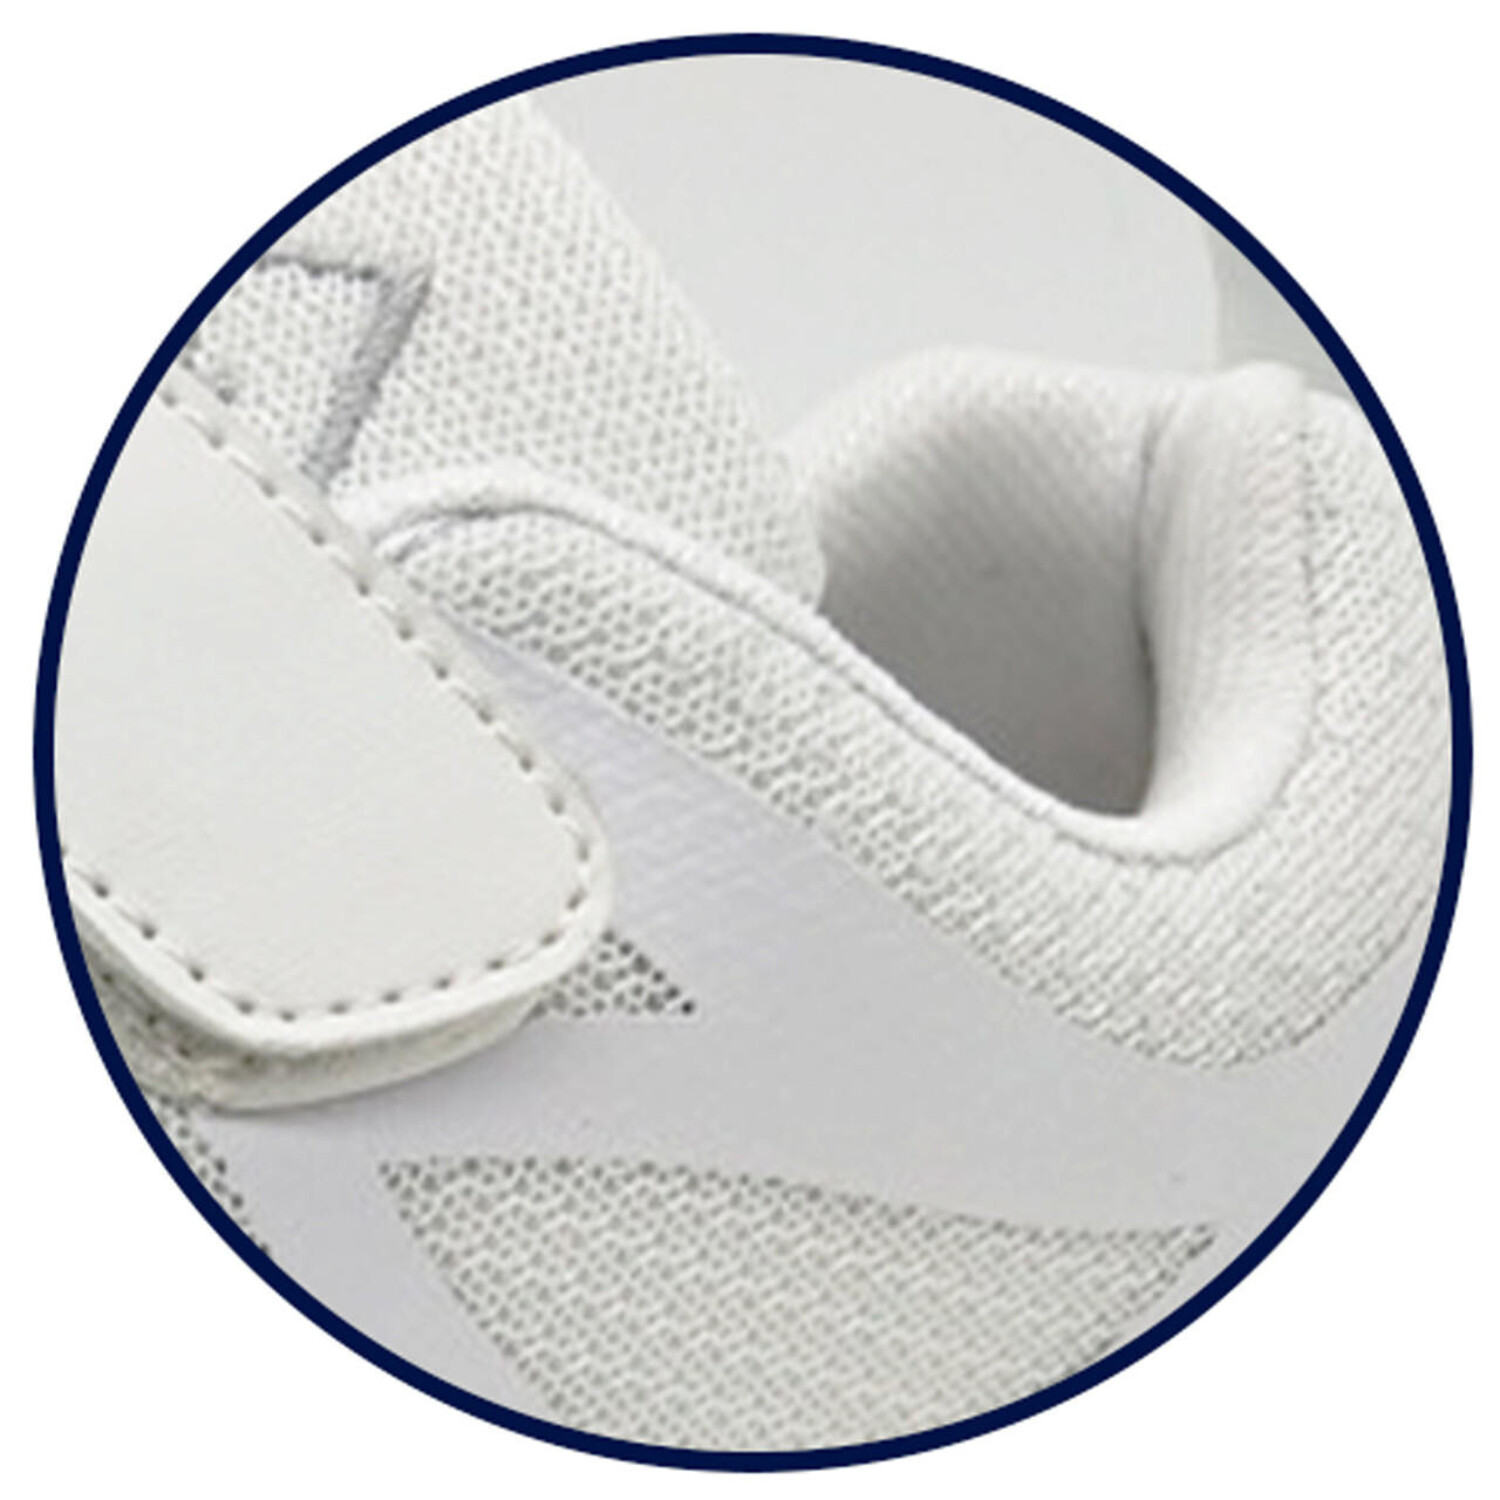 MAIR Mens Ultra-Light Double Hook-and-Loop PACER WHITE Athletic Mesh Sneaker Shoe - image 3 of 3